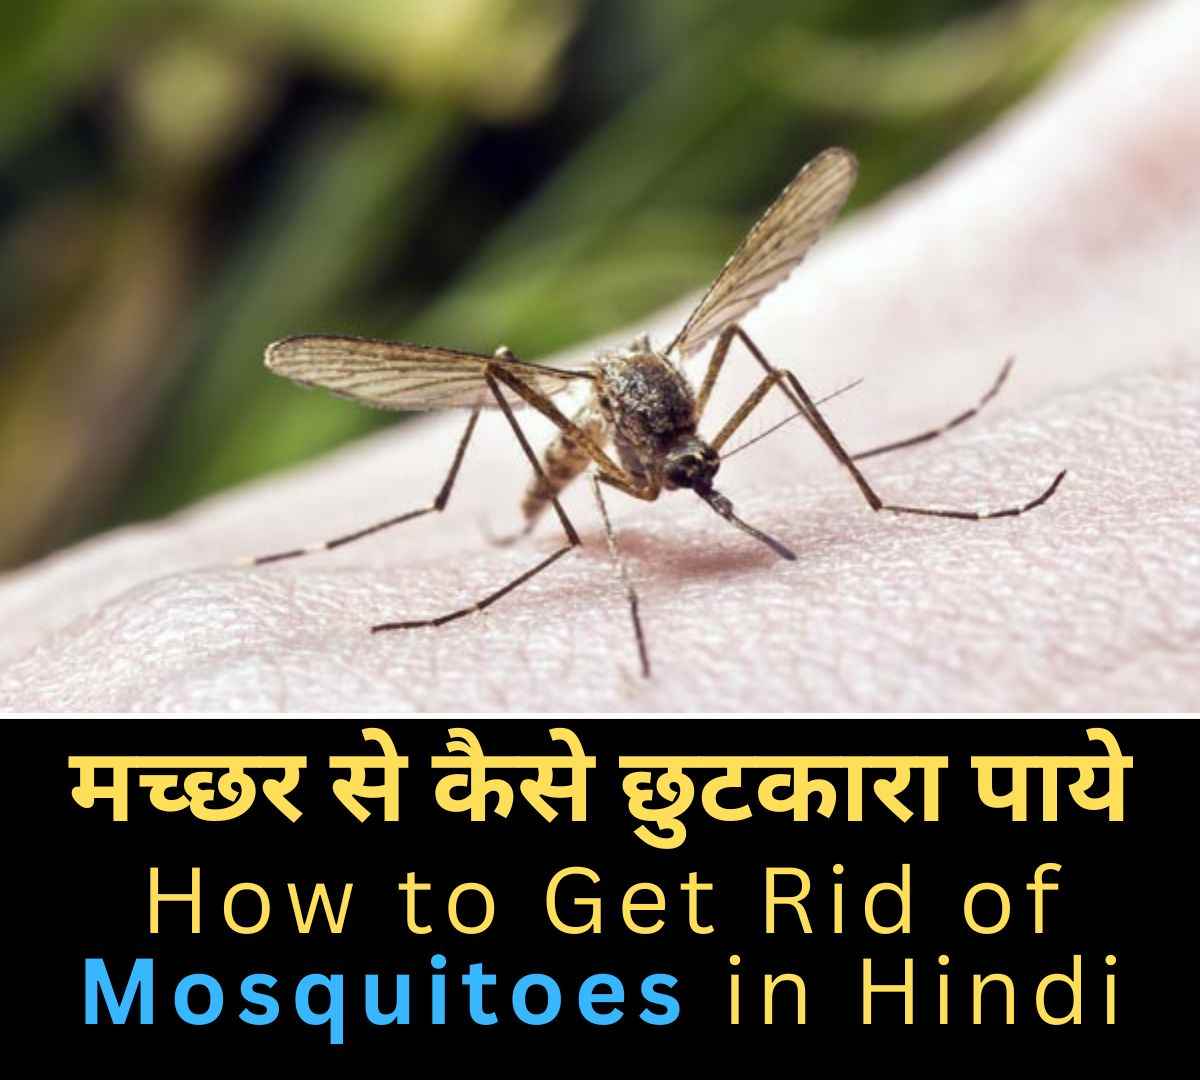 How to Get Rid of Mosquitoes in Hindi